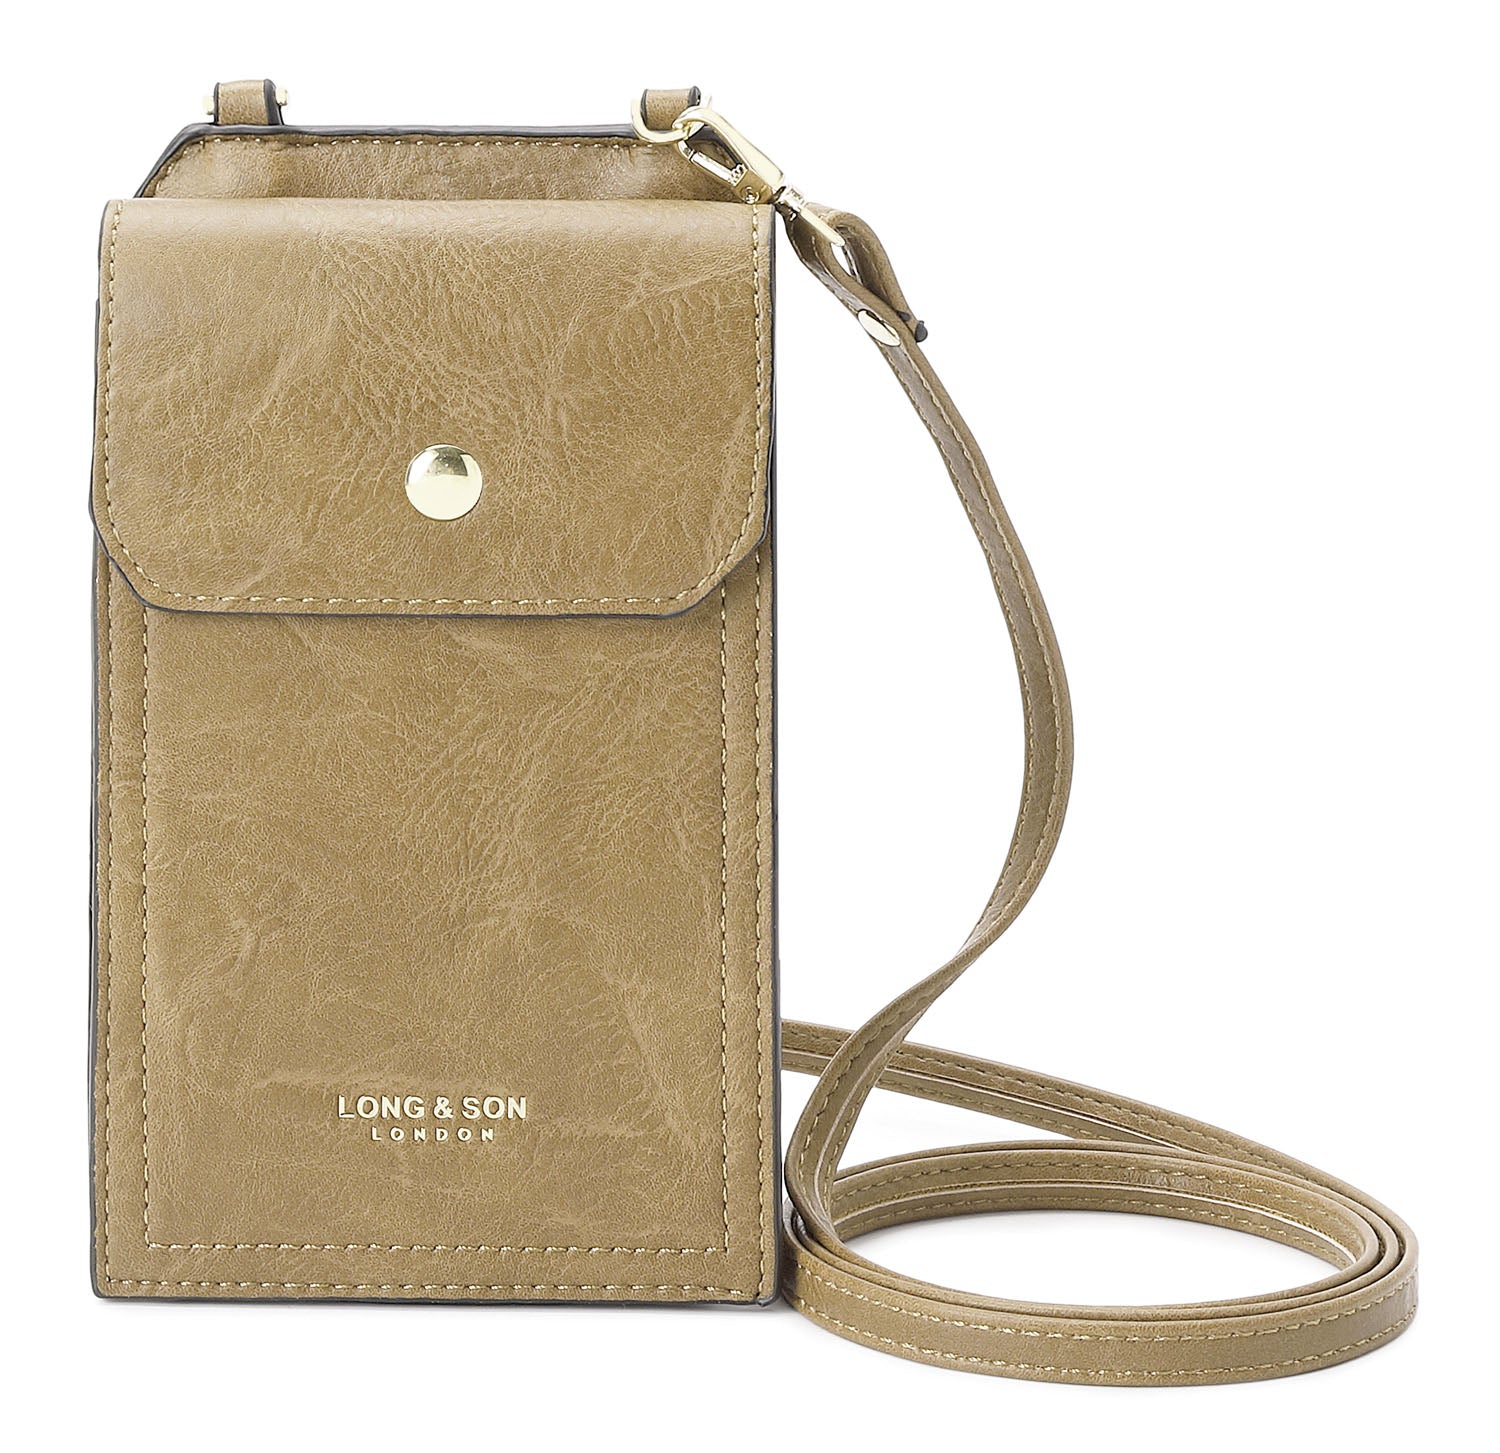 SMALL TAUPE MOBILE PHONE HOLDER CROSS BODY BAG